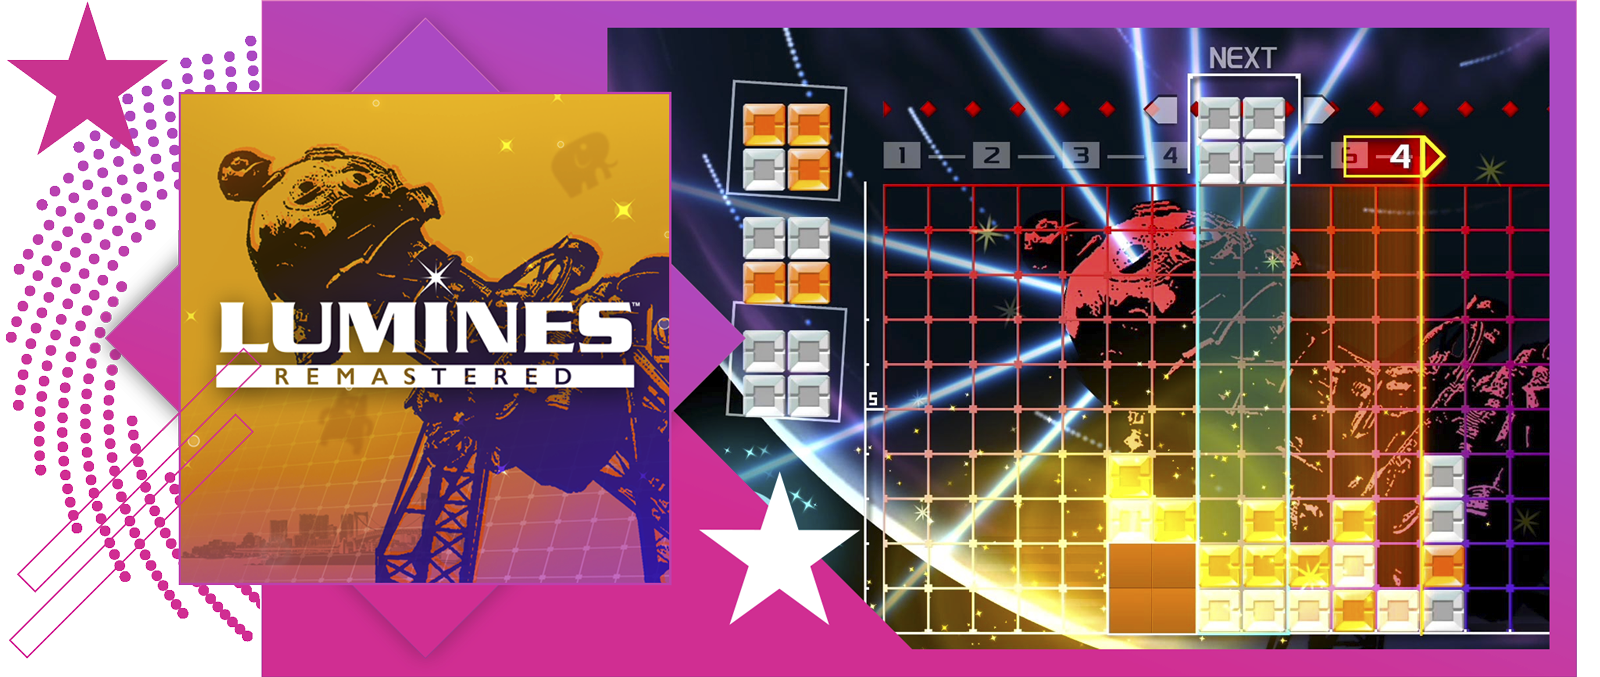 Best rhythm games feature image, featuring key art and gameplay from Lumines Remastered.